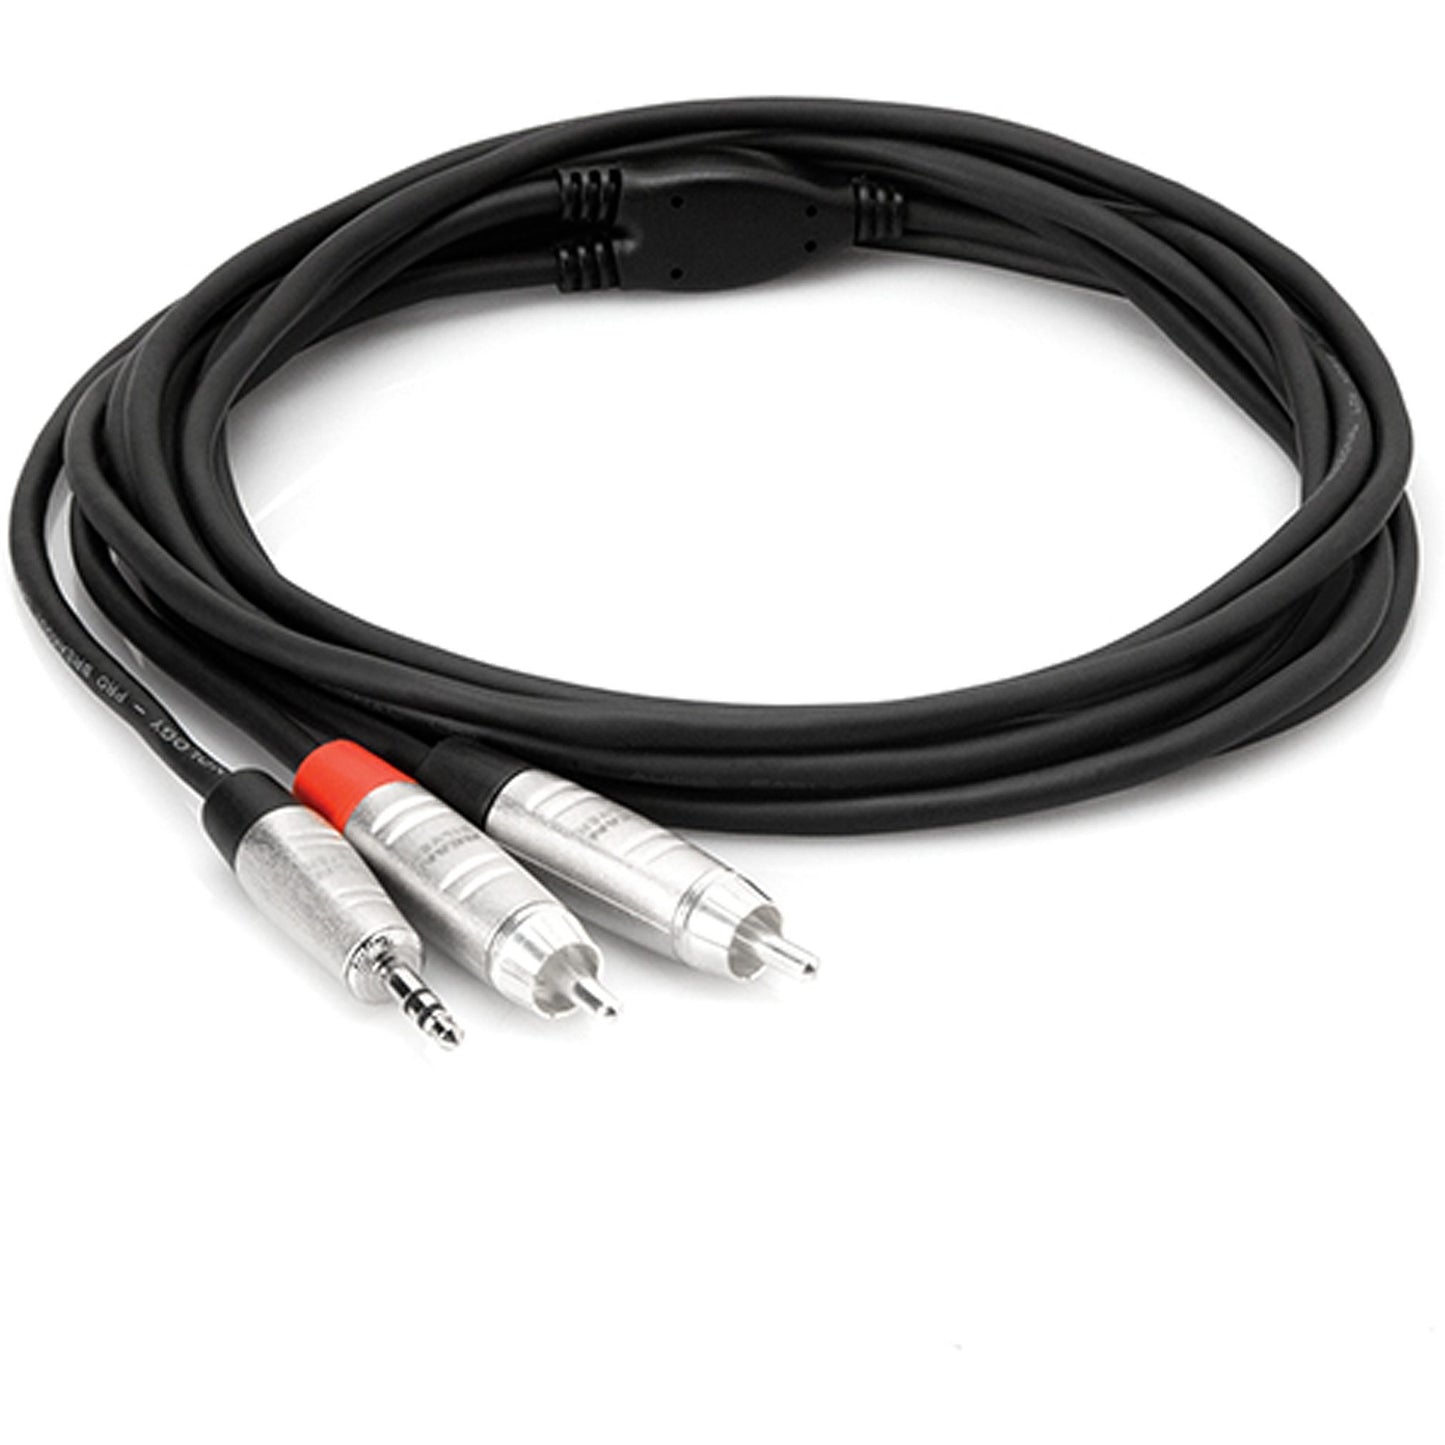 Hosa REAN Pro Stereo Breakout Mini to Dual RCA Cable, 3 Foot